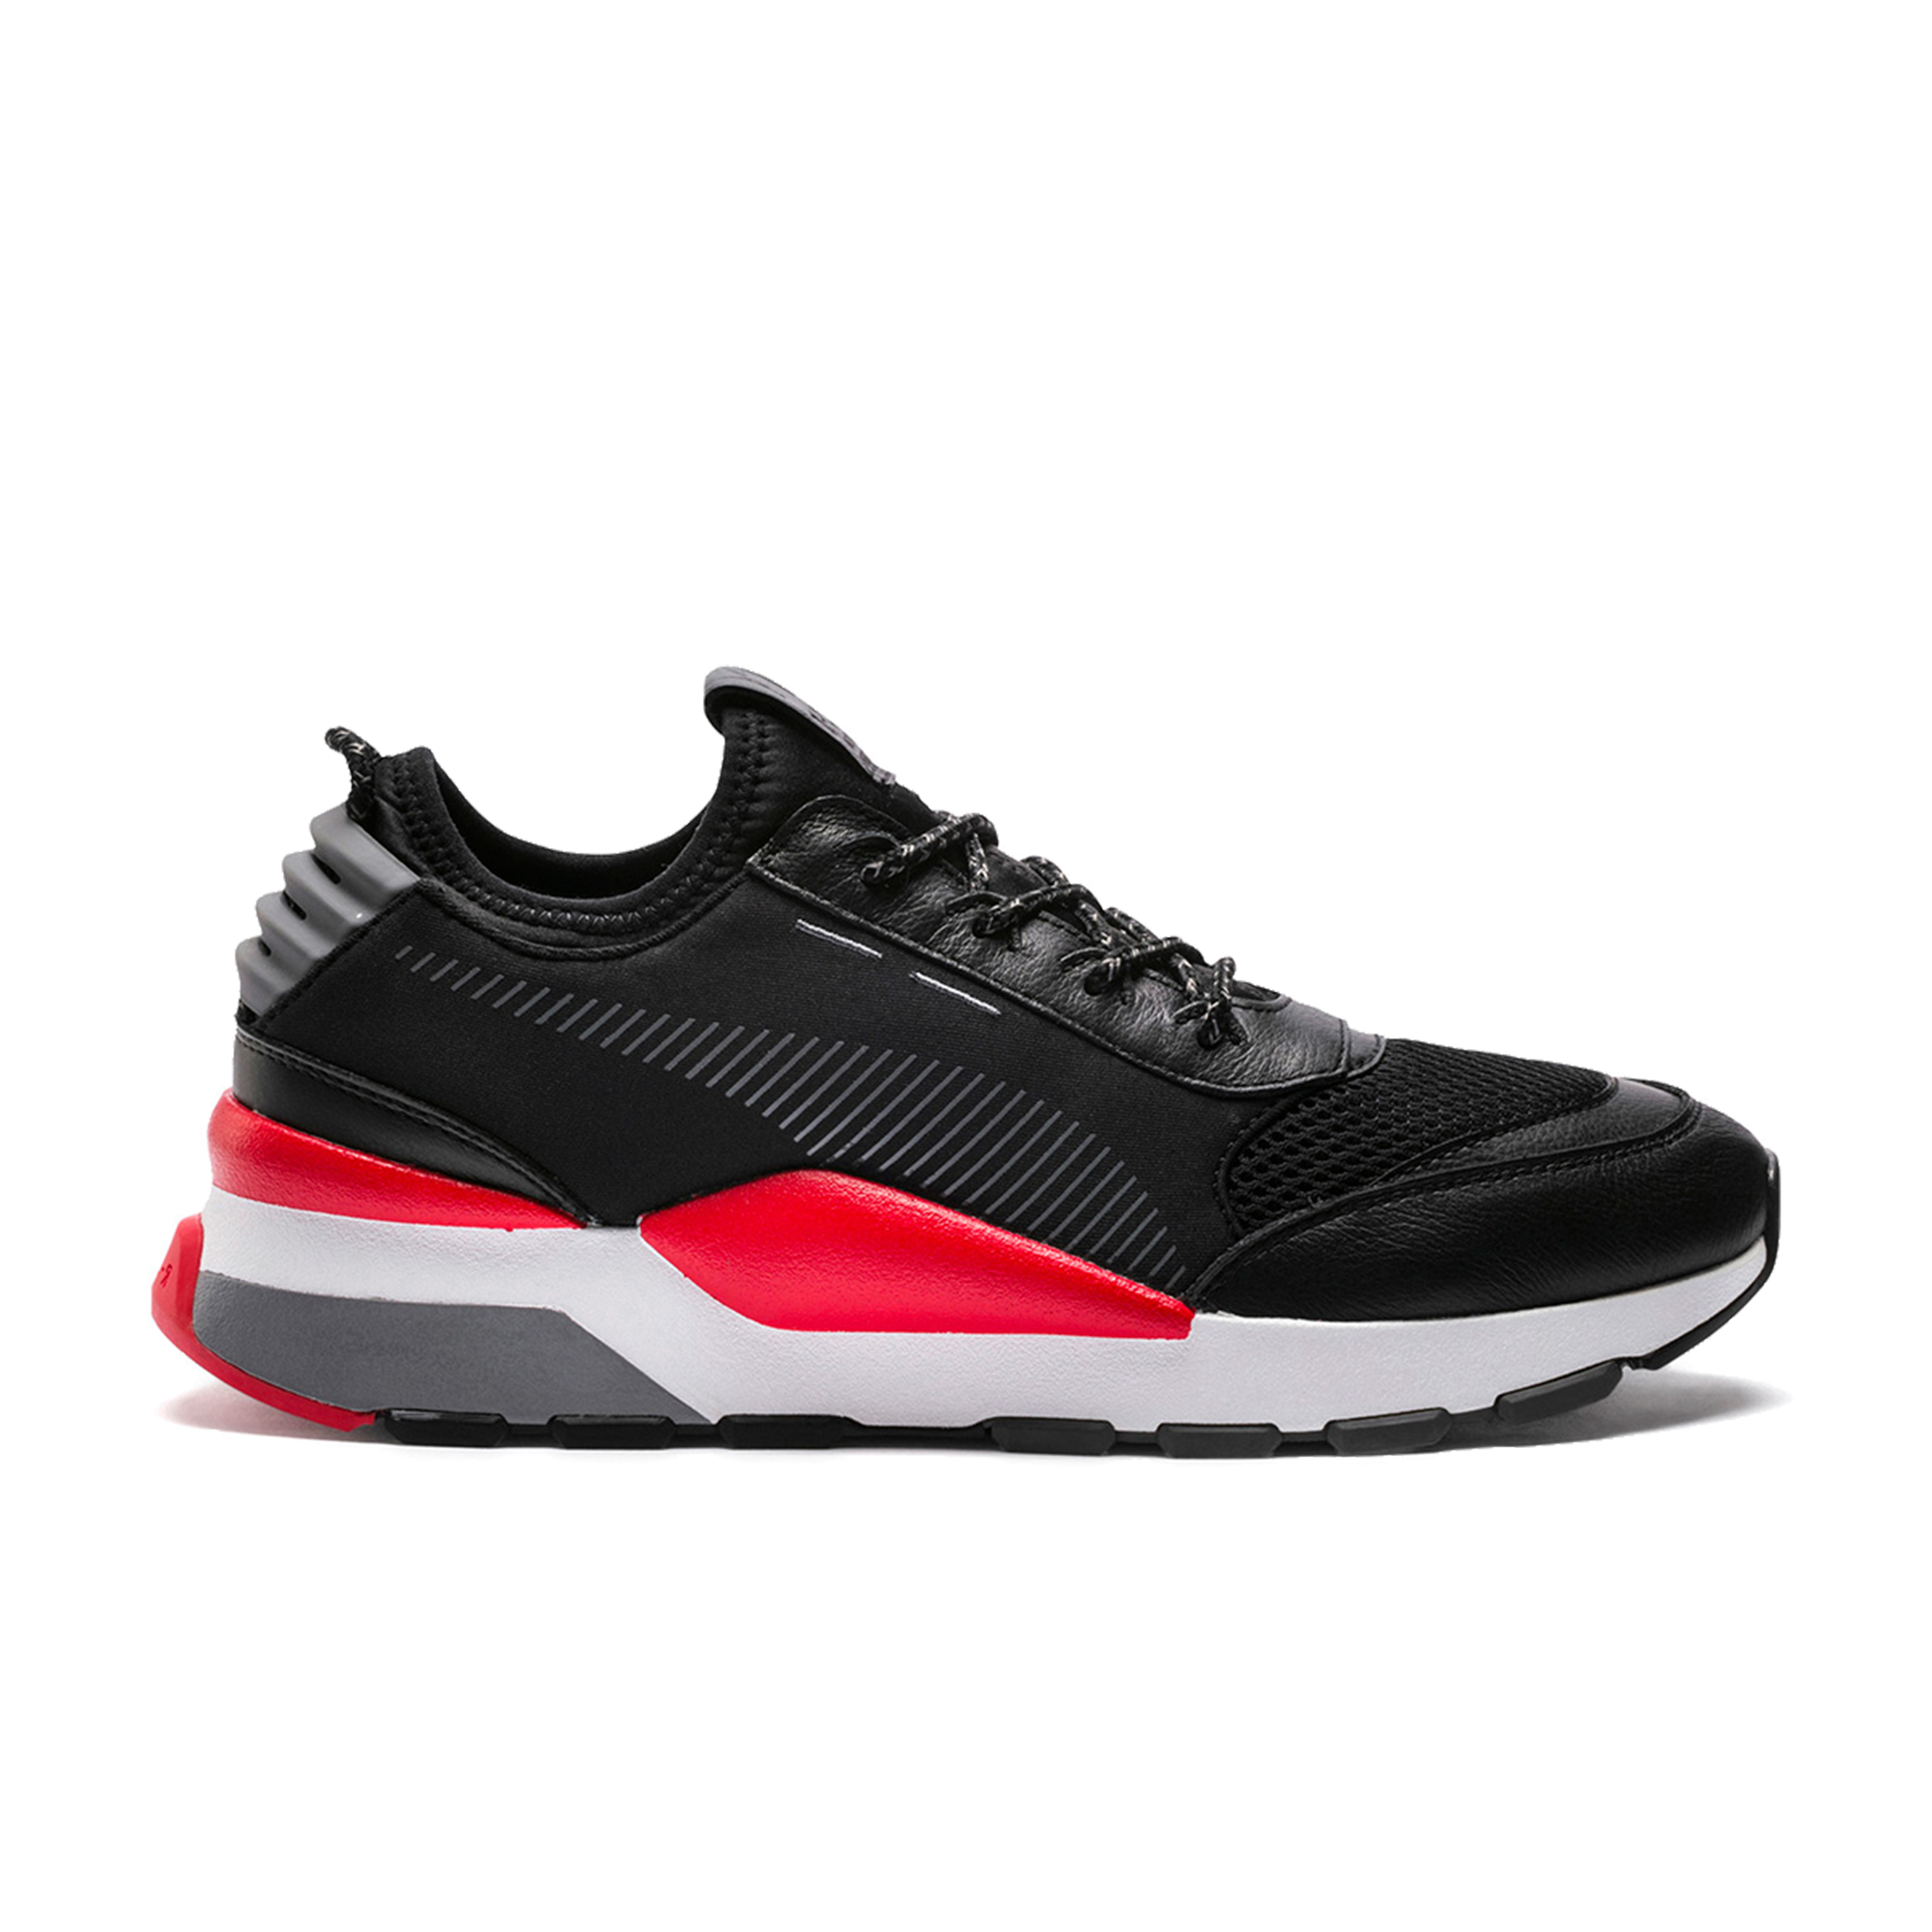 puma sneakers black and red